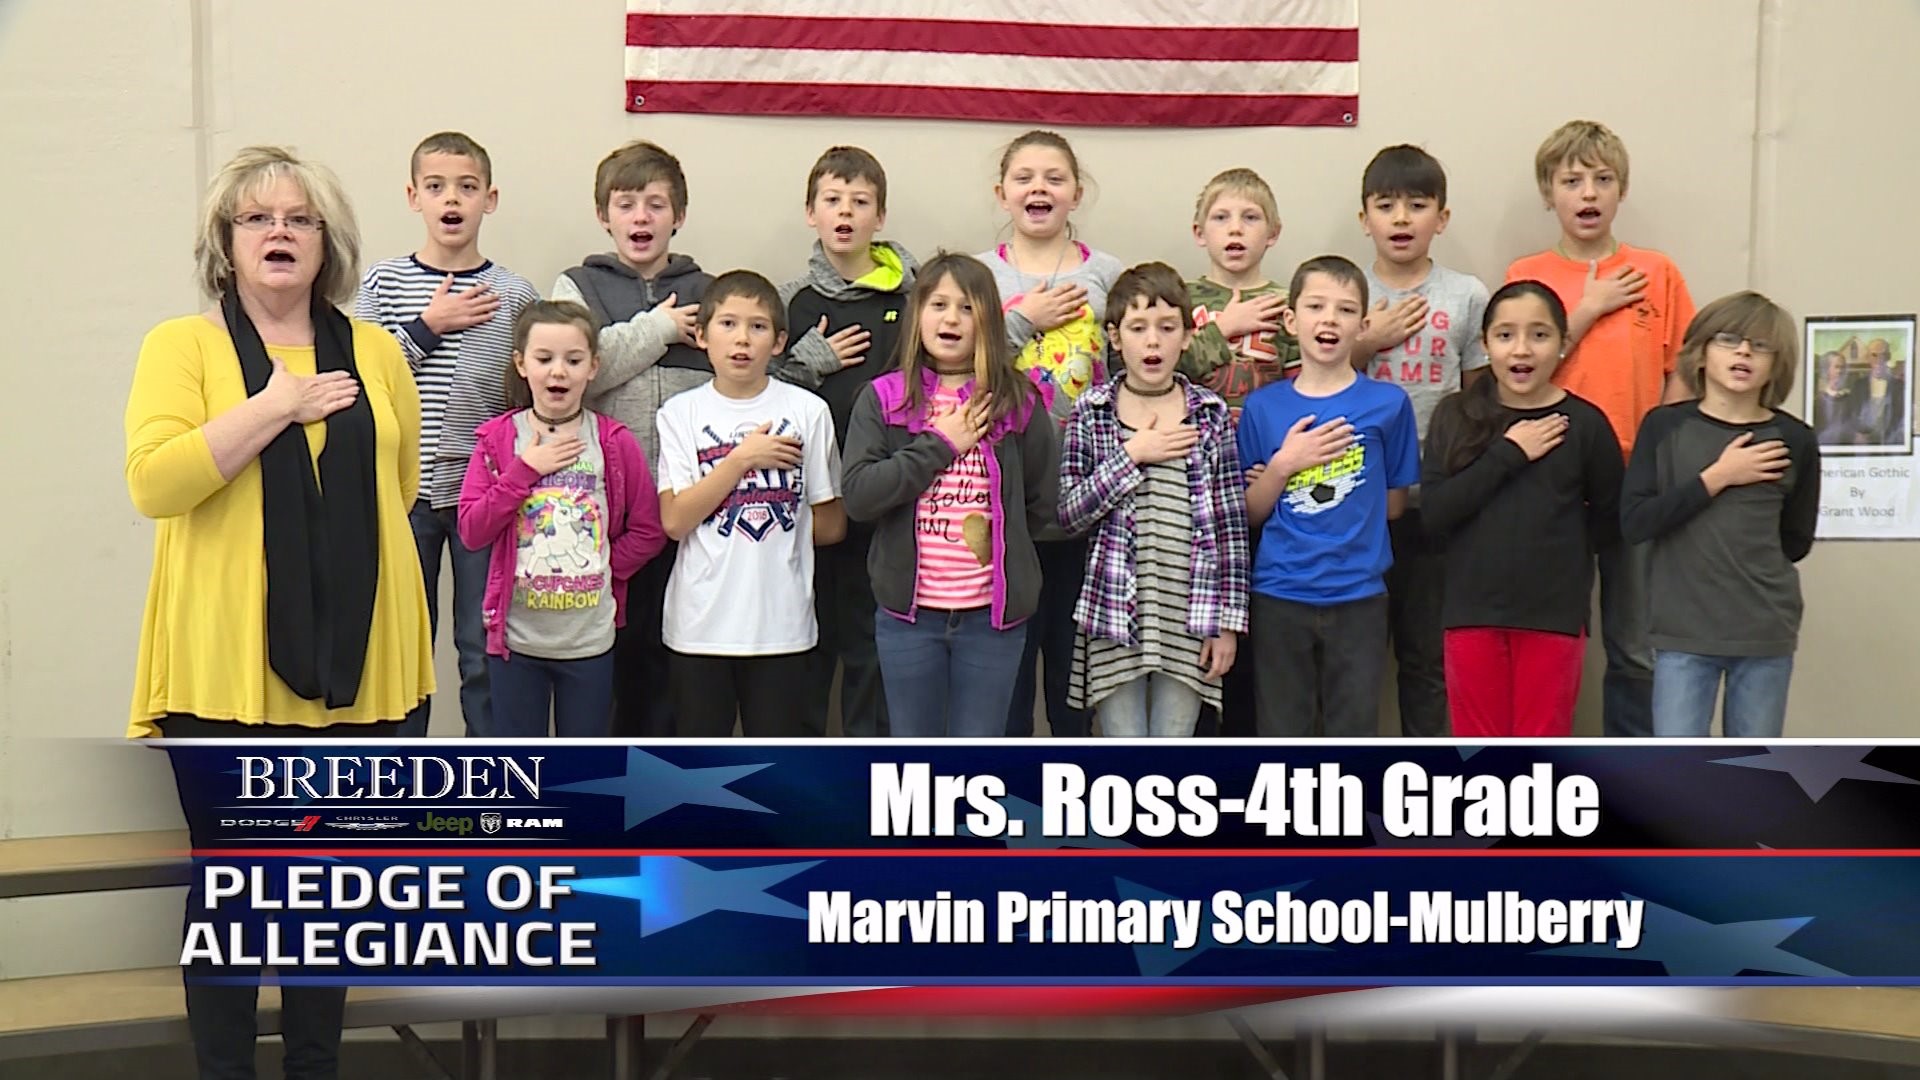 Mrs. Ross  4th Grade Marvin Primary School, Mulberry